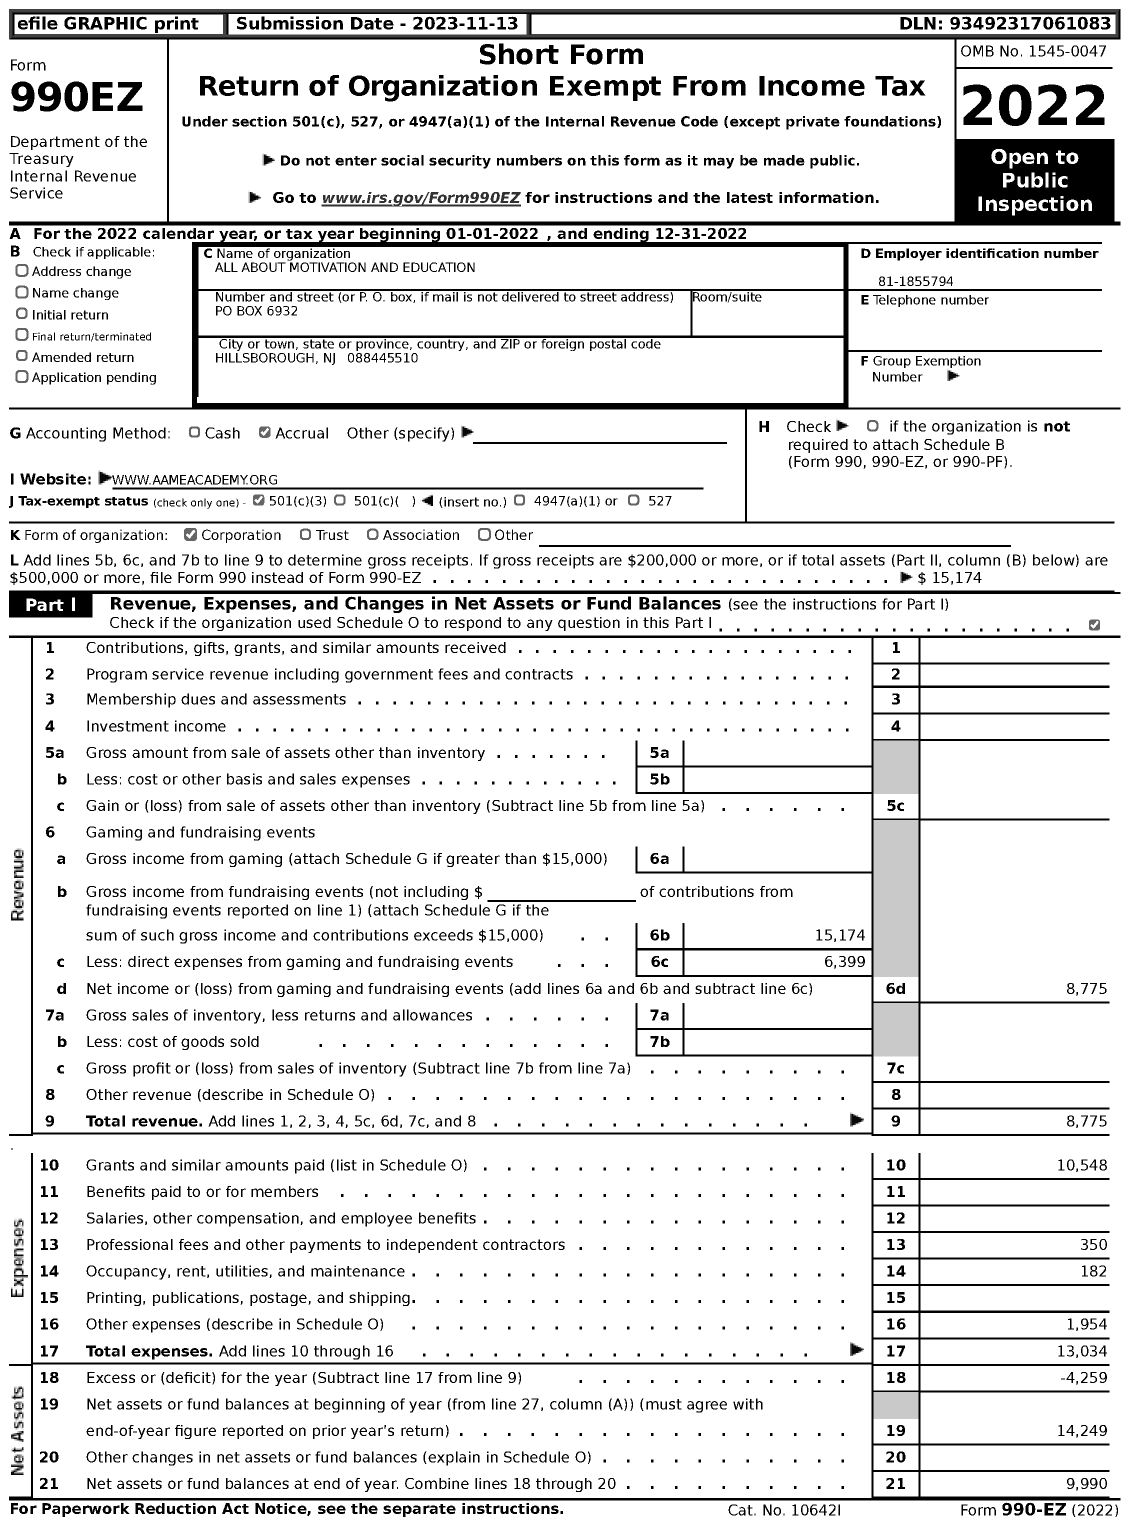 Image of first page of 2022 Form 990EZ for All About Motivation and Education